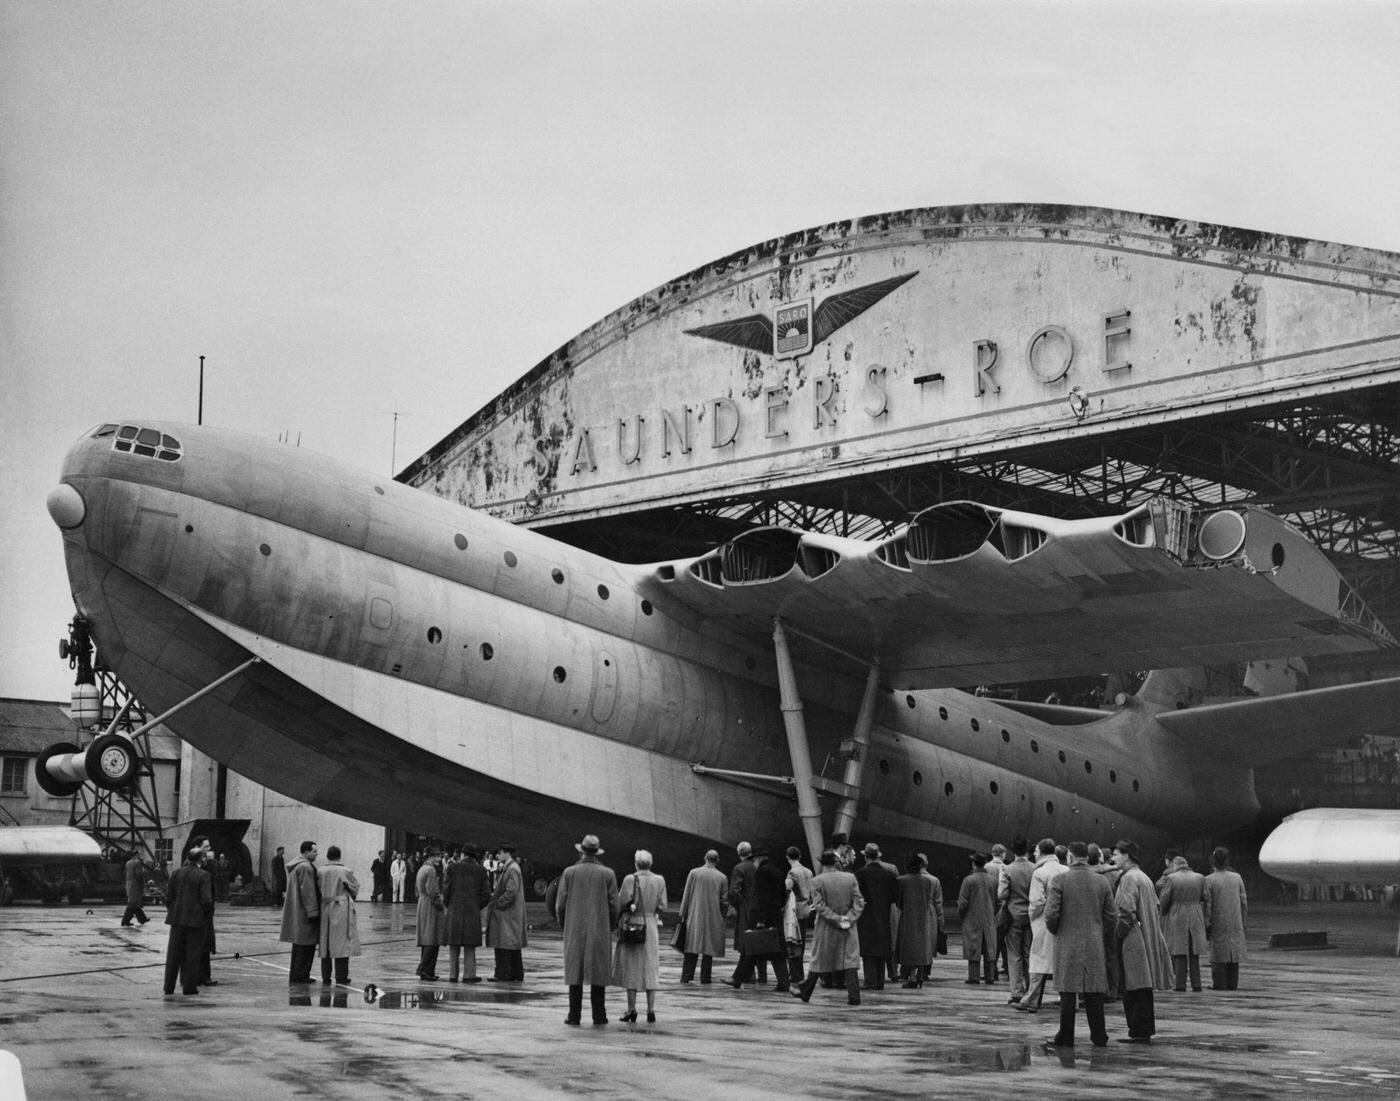 The SaundersRoe SR45 Princess passenger flying boat prototype, GALUN, emerges from its hangar at the SaundersRoe Cowes facility on the Isle of Wight in the United Kingdom on October 31, 1951.